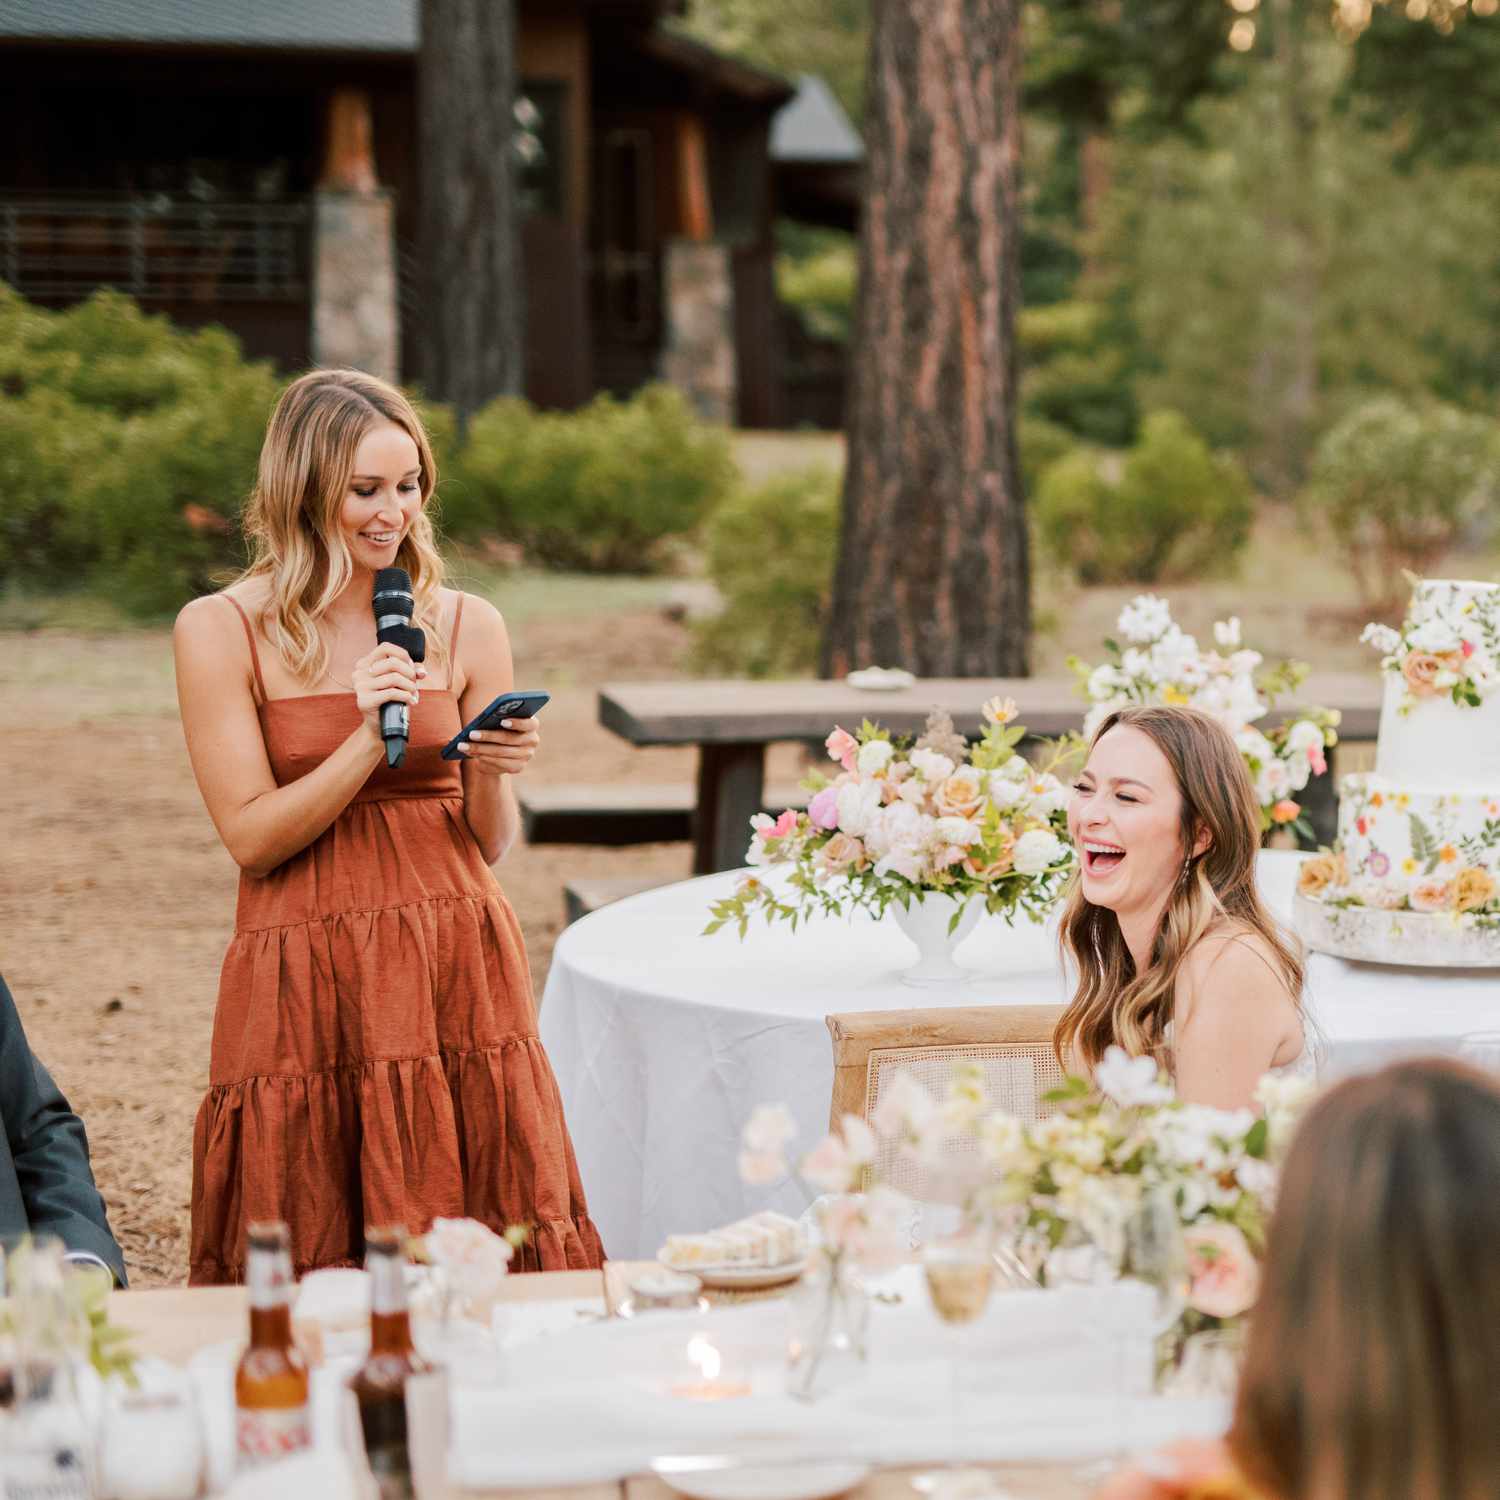 How Do You Give a Killer Maid of Honor Speech?